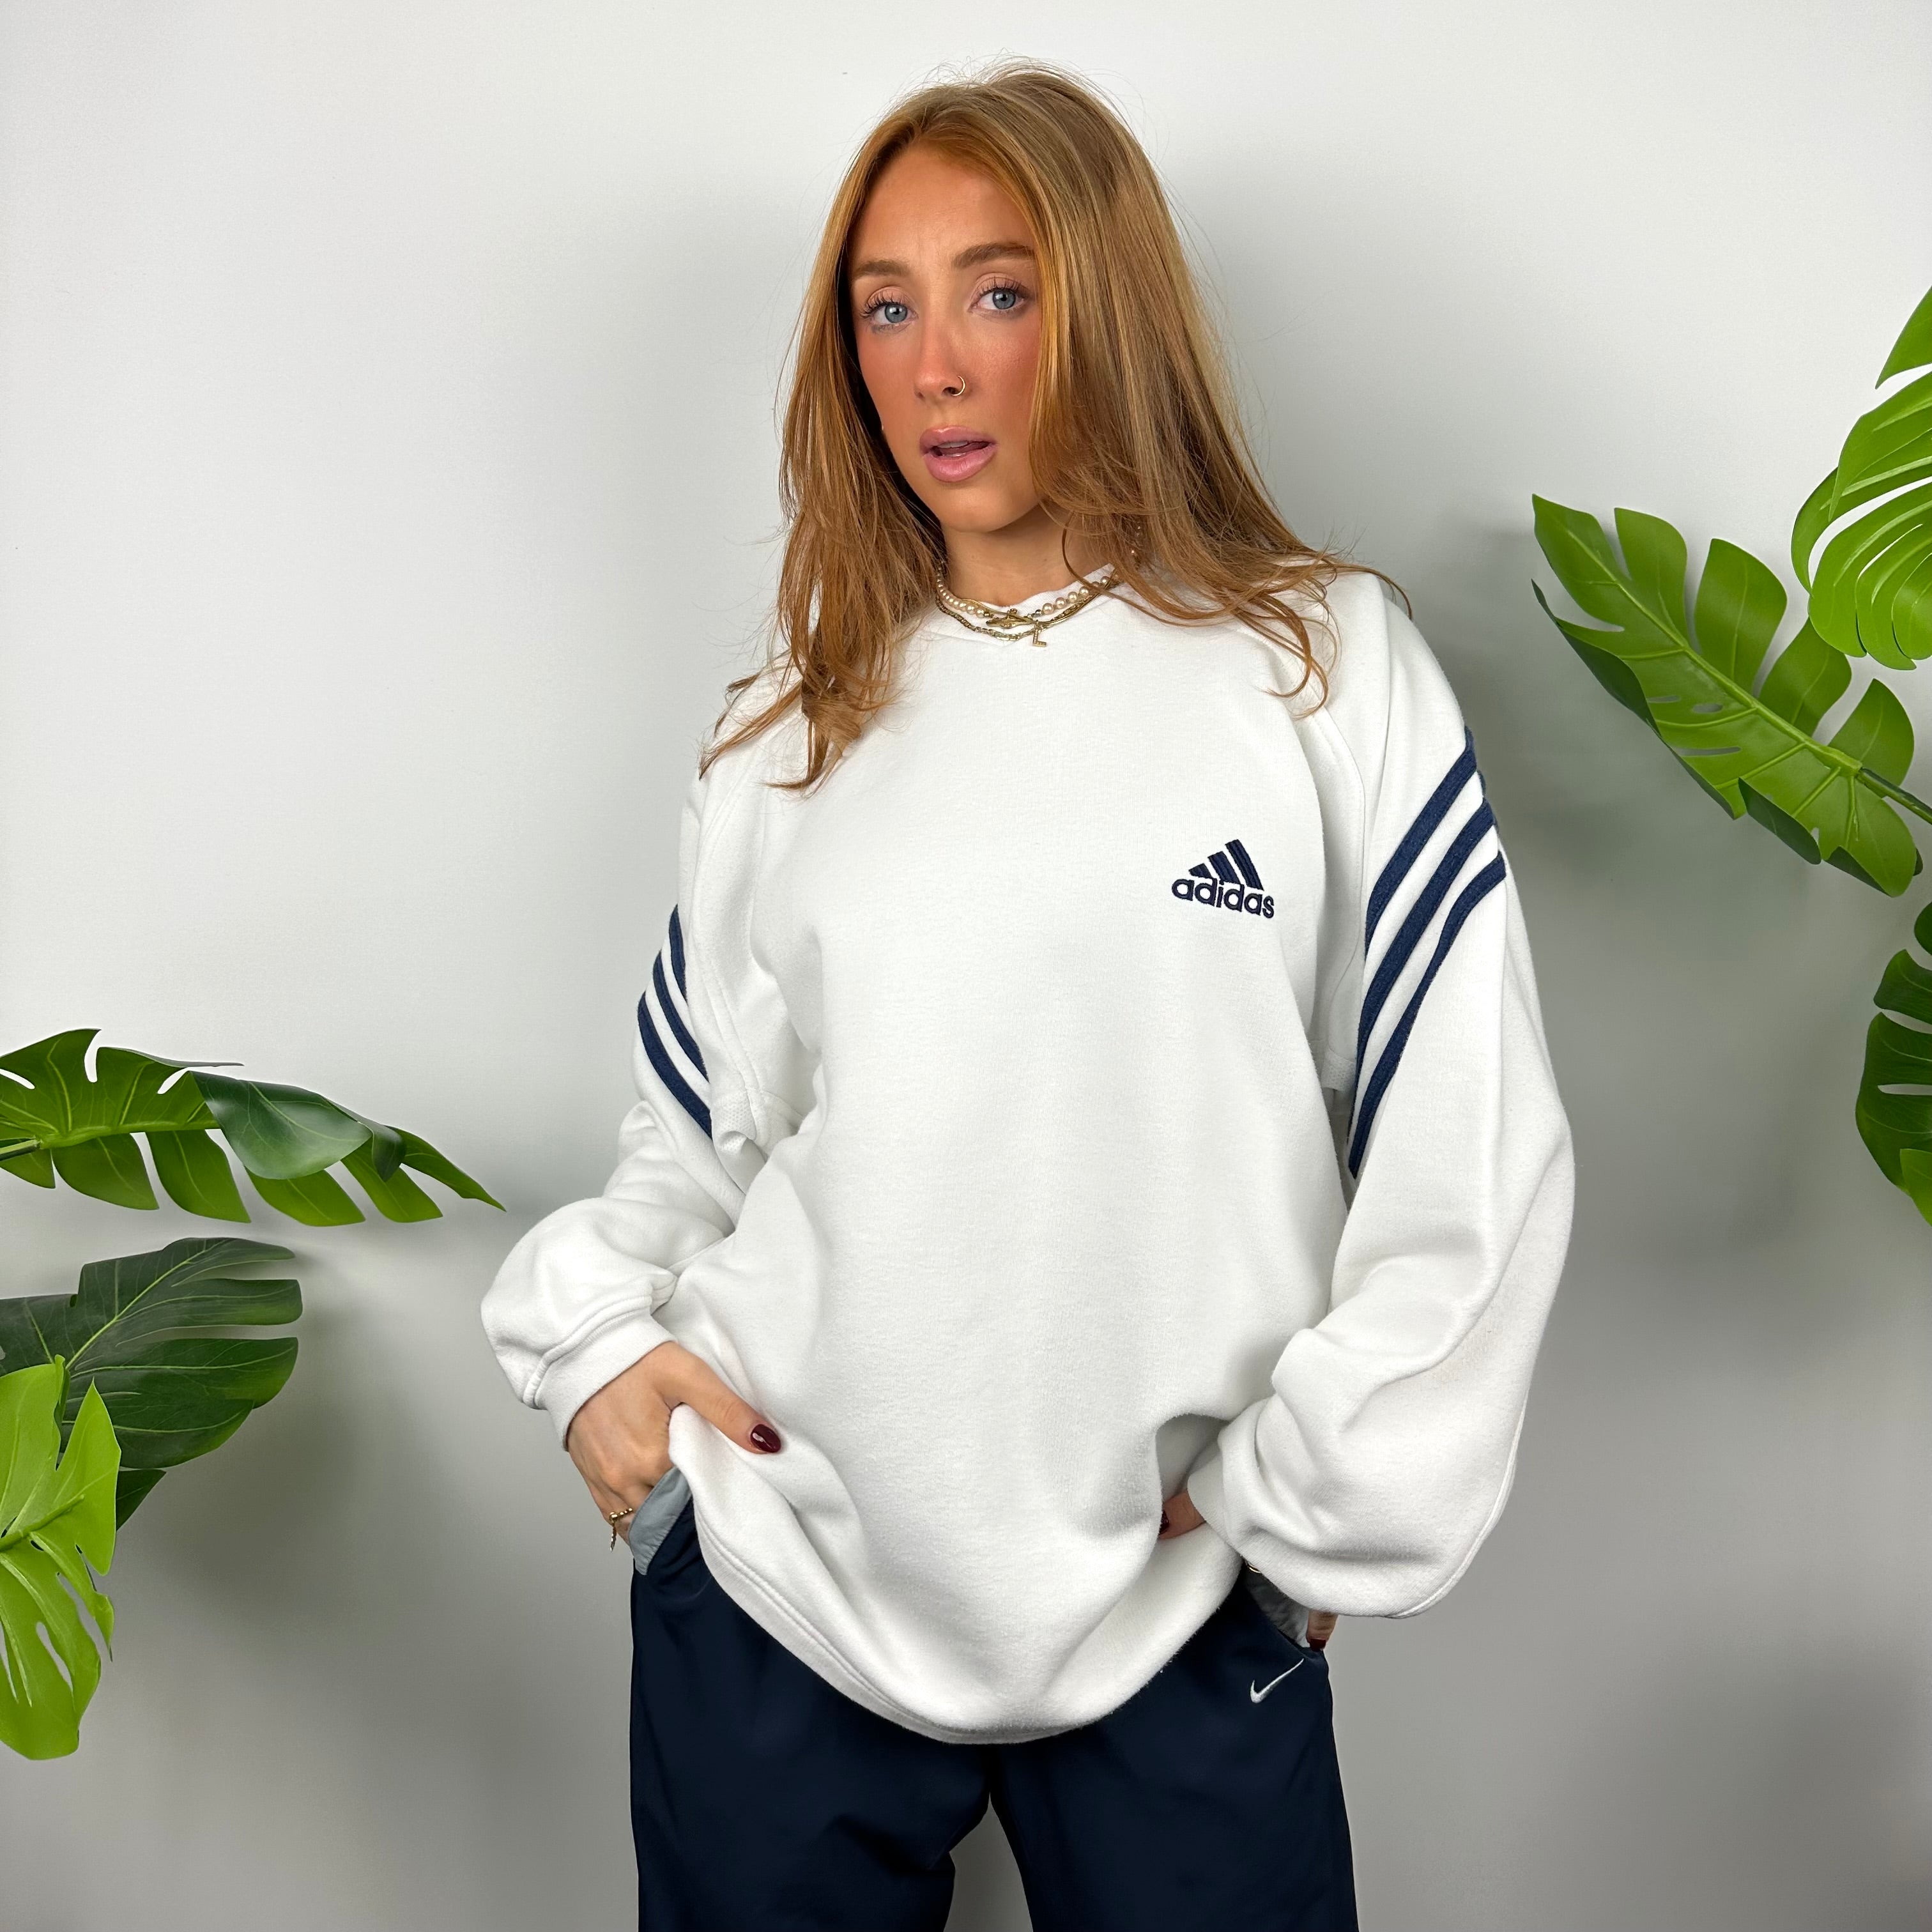 Adidas White Embroidered Spell Out Sweatshirt (L)